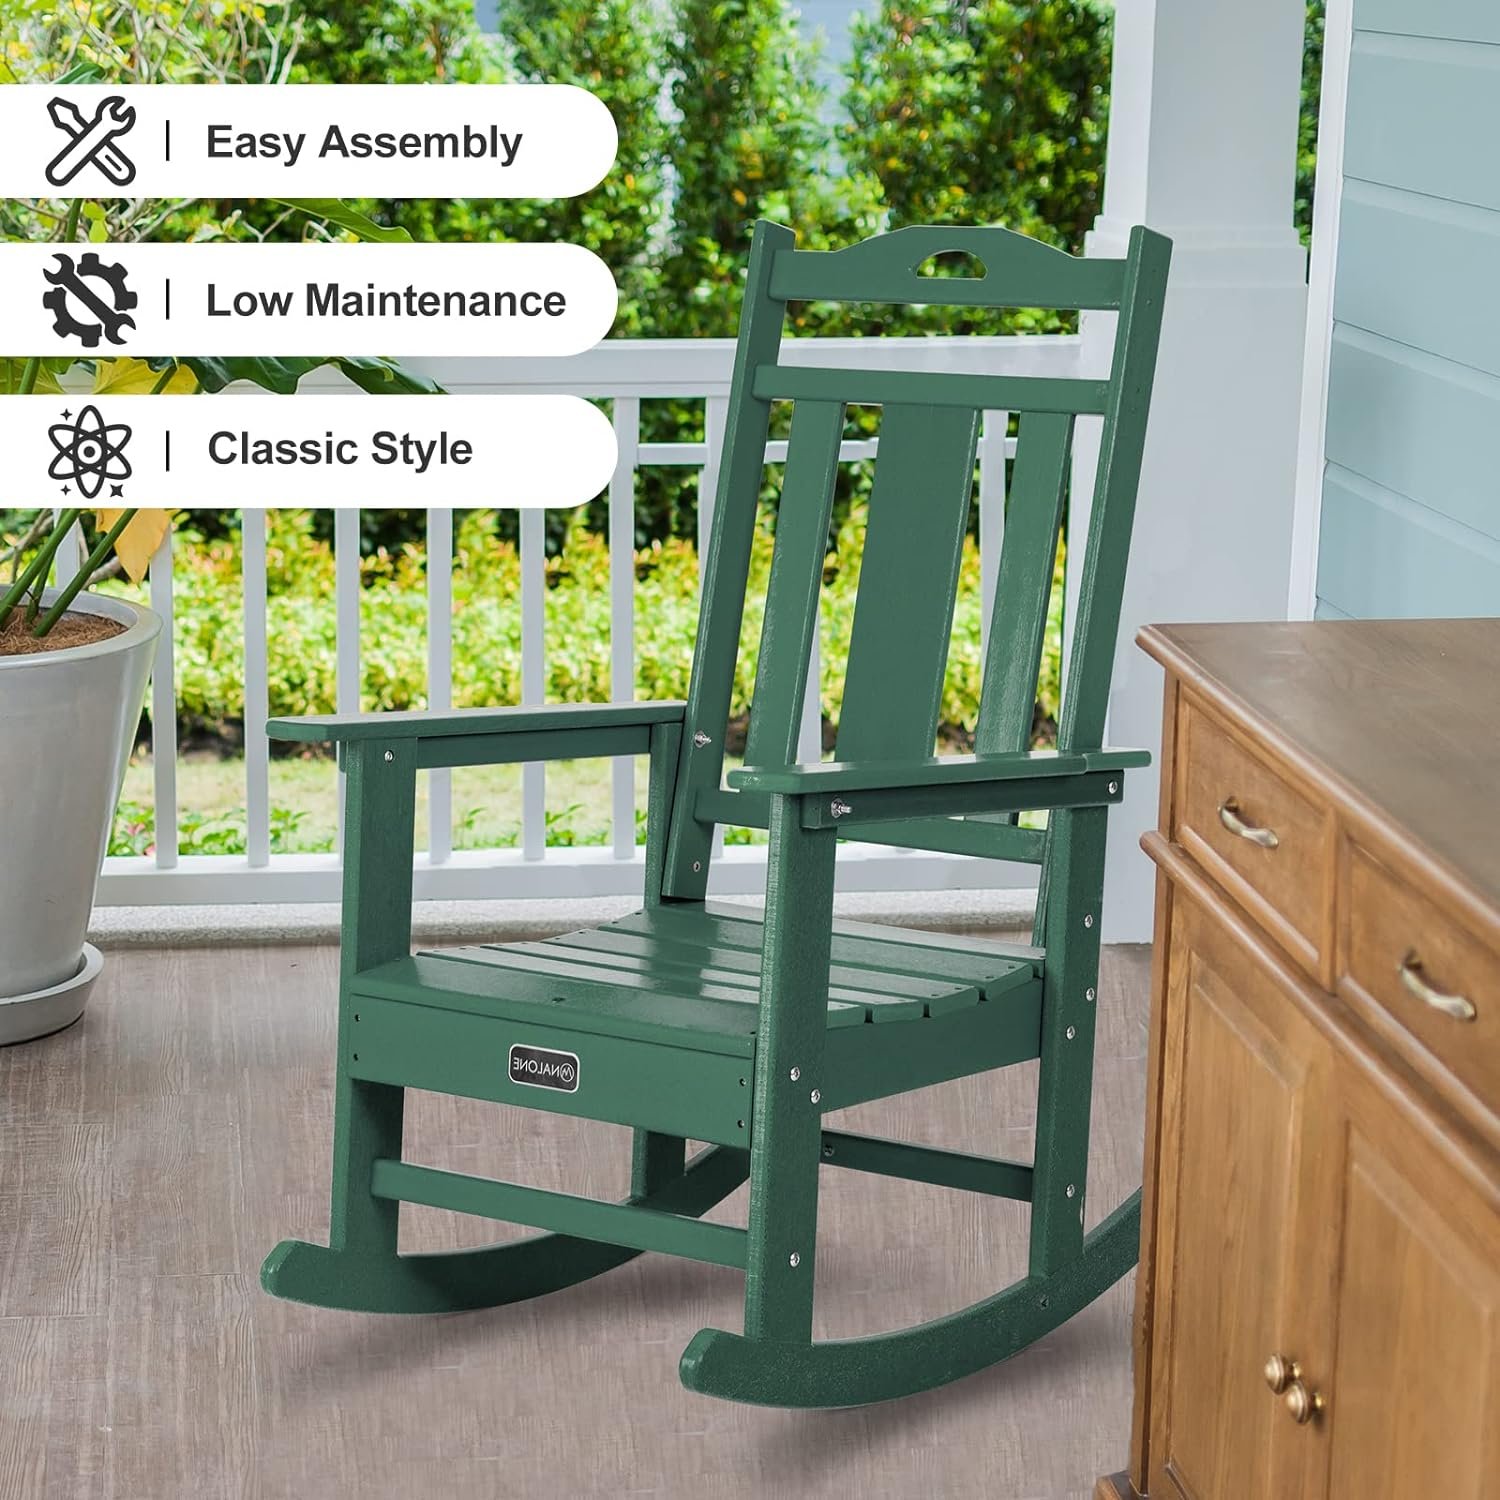 nalone Outdoor Rocking Chair Set Review